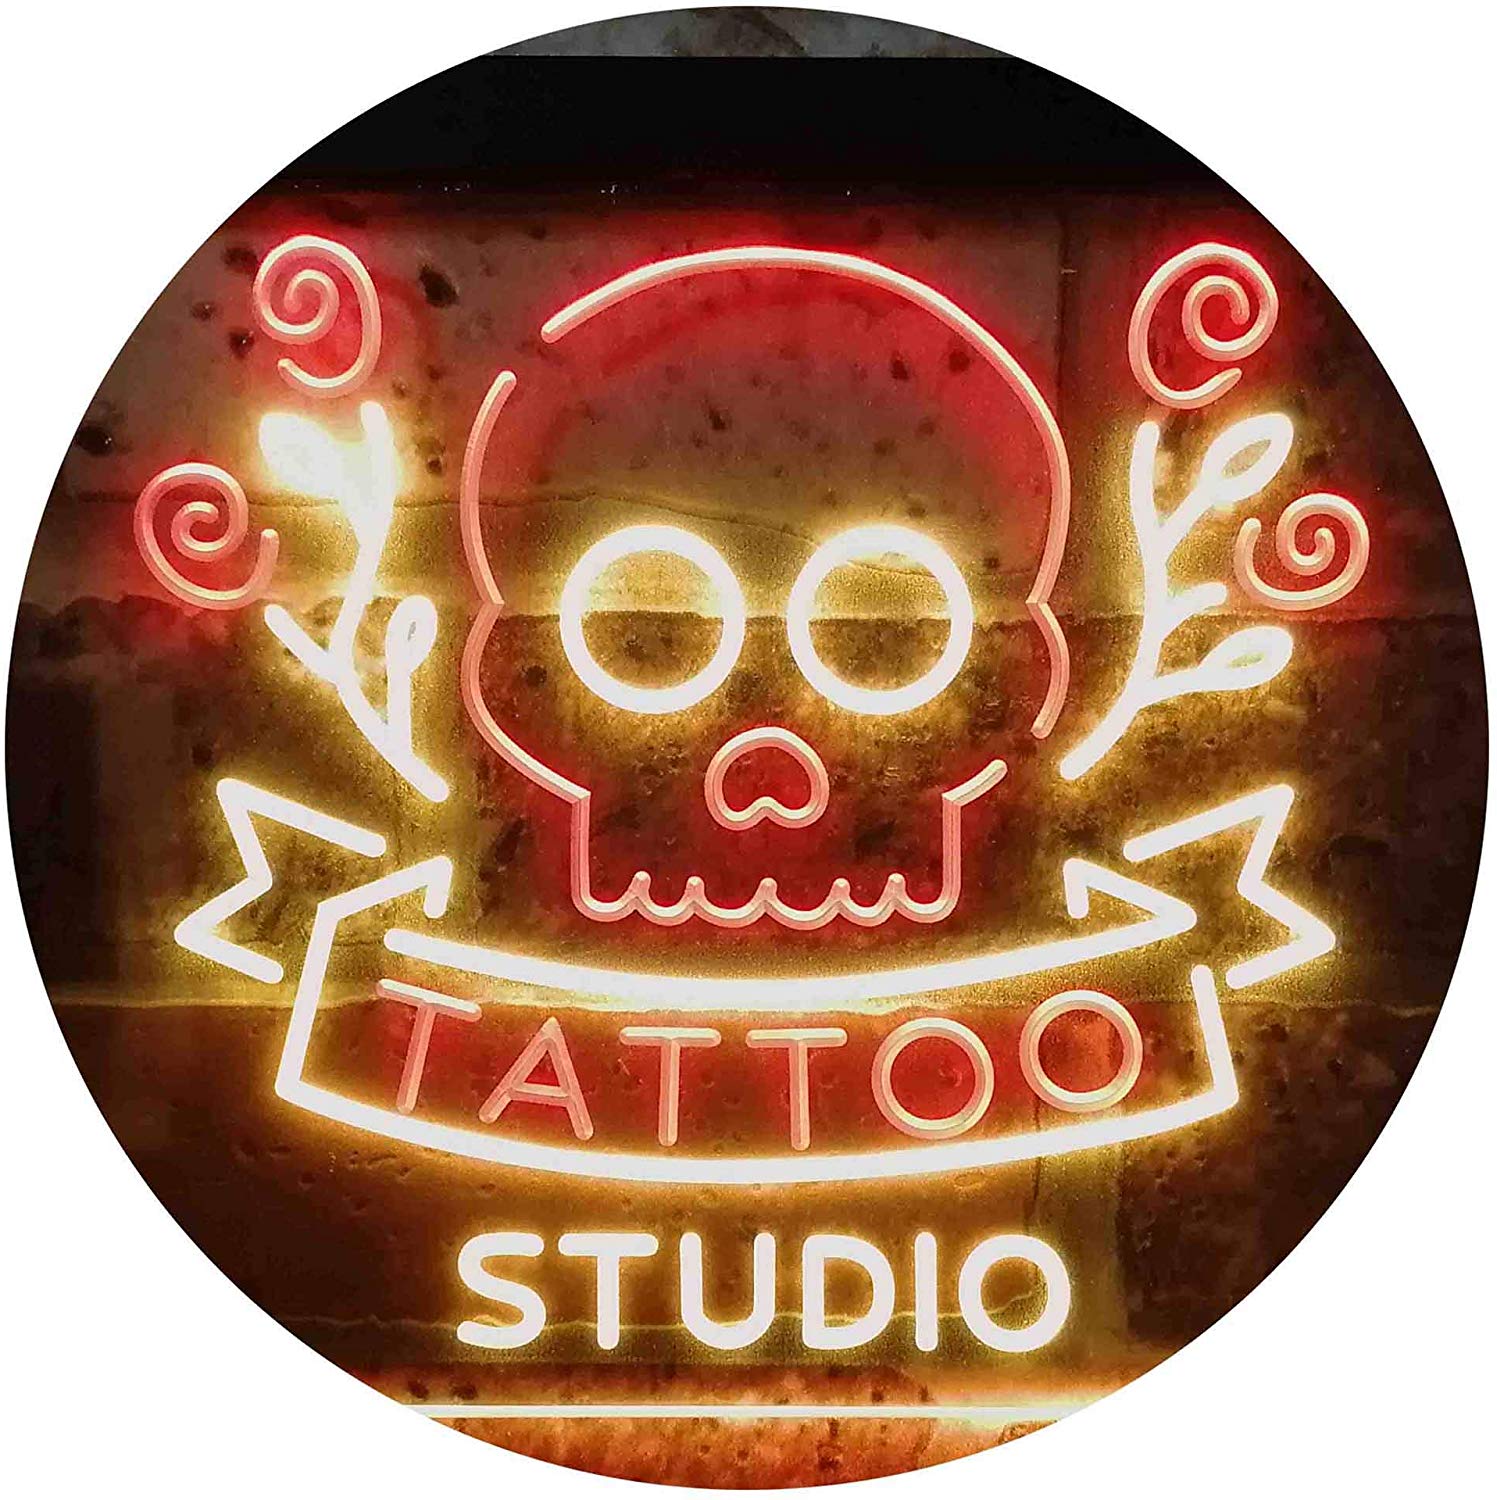 16,200 Tattoo Shop Sign Images, Stock Photos, 3D objects, & Vectors |  Shutterstock